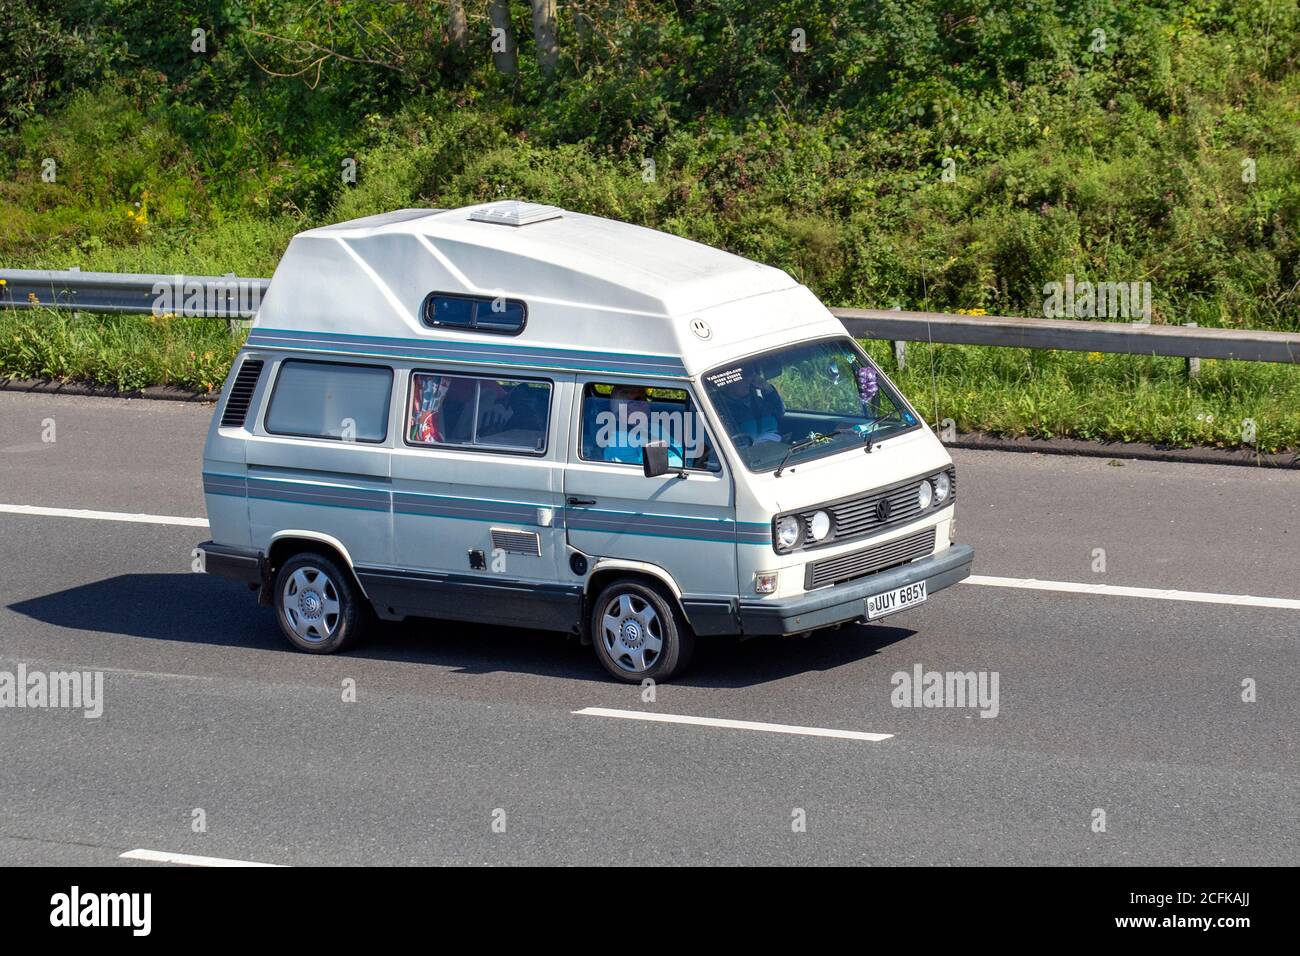 1983 80s WHITE vw Volkswagen HIGH-TOP VAN; Caravans and Motorhomes, campervans on Britain's roads, RV leisure vehicle, family holidays, caravanette vacations, Touring caravan holiday, van conversions, Vanagon autohome, life on the road, Stock Photo